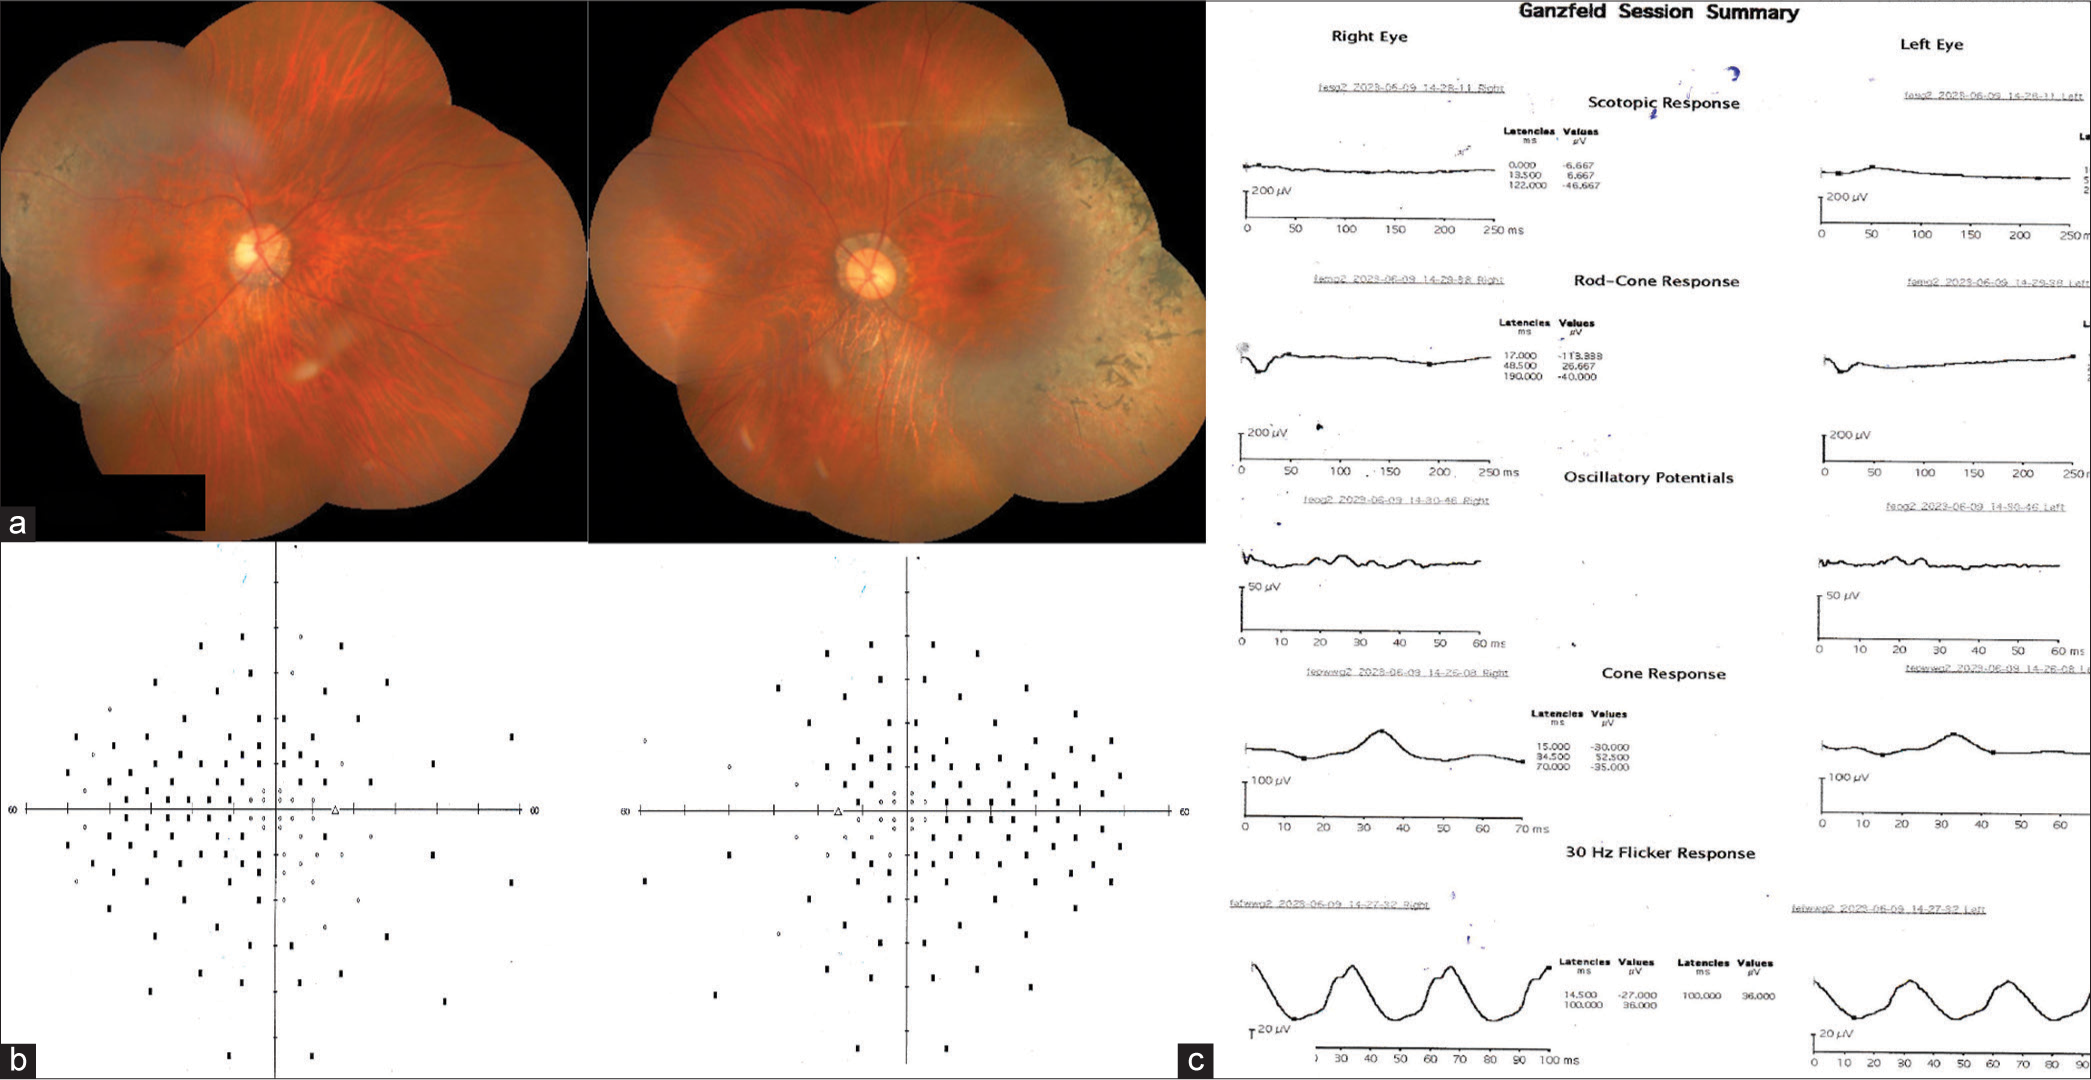 (a) Sectoral retinitis pigmentosa: bony spicules are seen in the temporal retina. The optic disc appears to be tilted with peripapillary atrophic changes. Diffuse tessellation of the fundus can be seen. (b) Center-sparing visual field loss can be seen extending to the periphery. (c) Almost flat waveform in scotopic test and reduced b-wave amplitude and increased implicit time in photopic 30 Hz flicker electroretinogram.